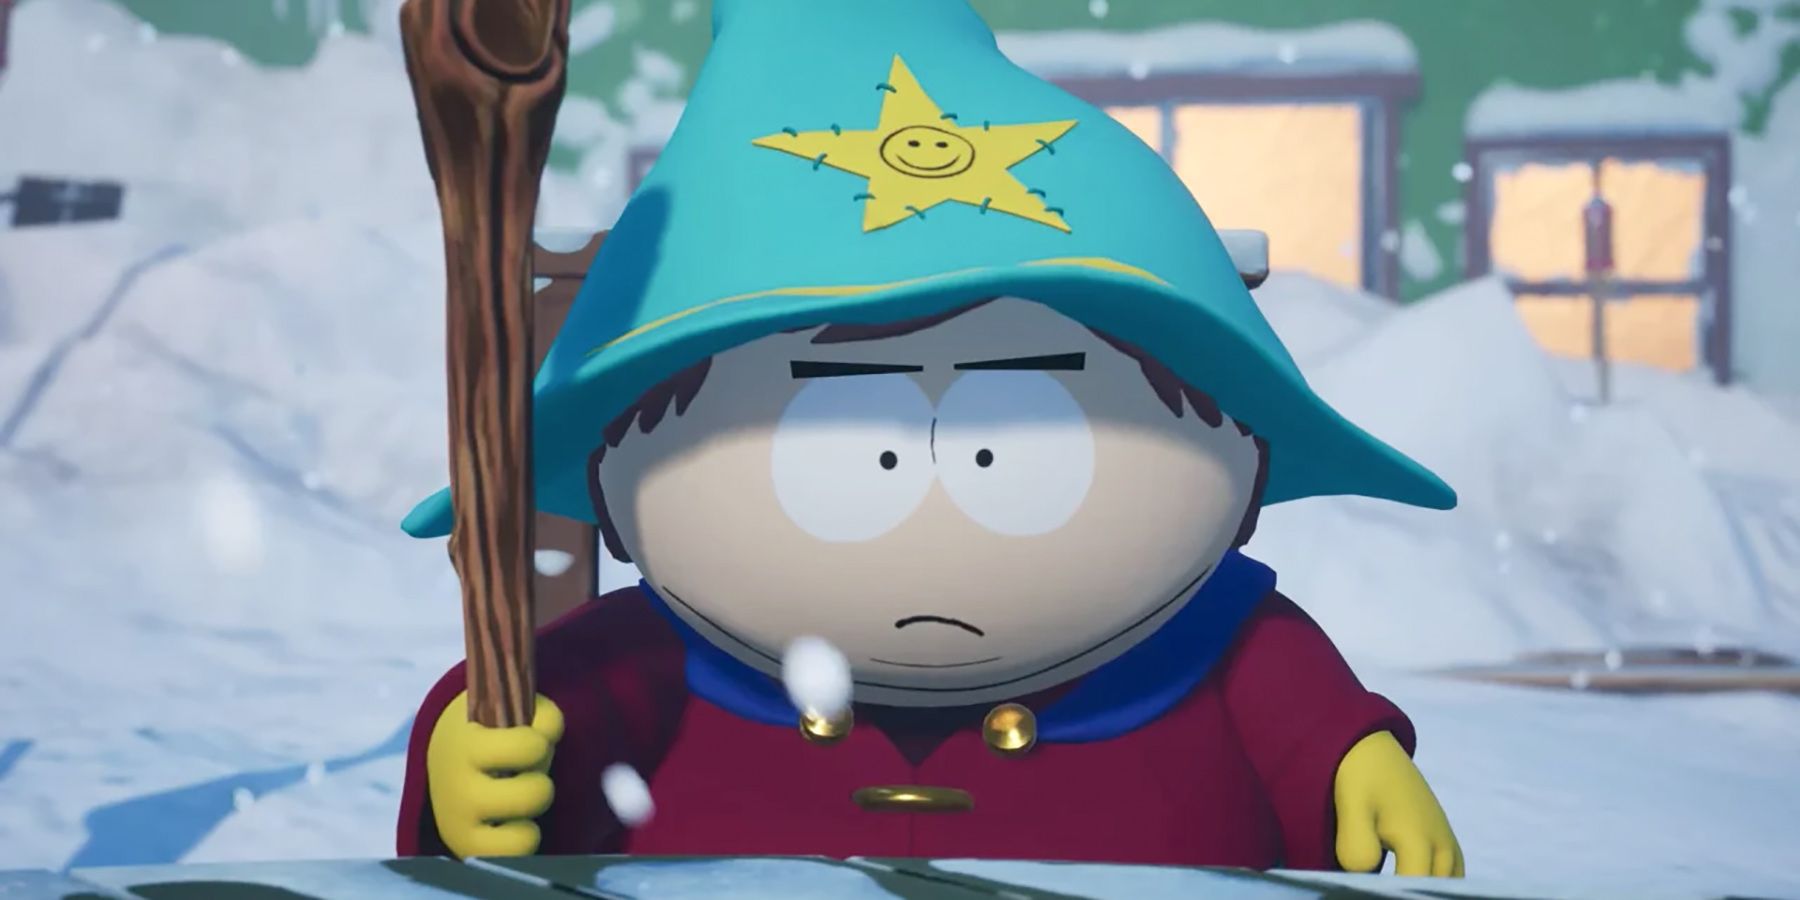 South Park: Snow Day Review